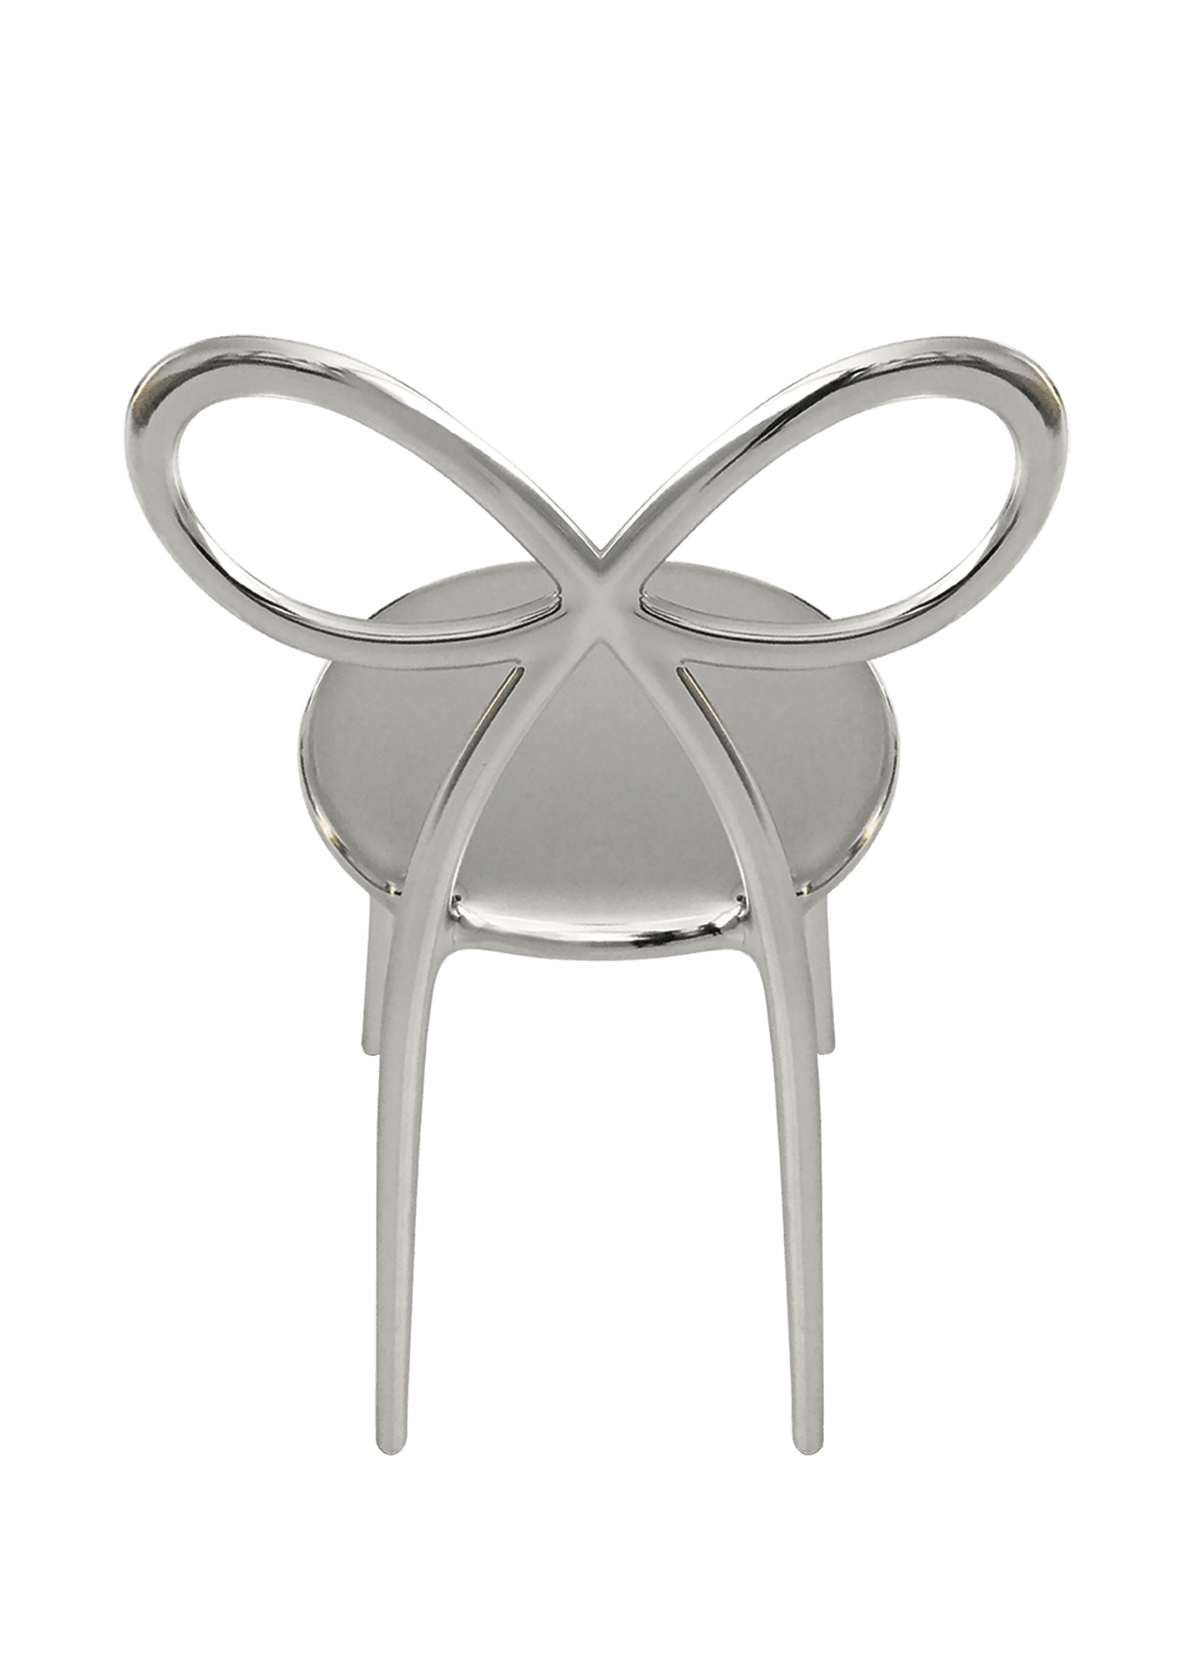 Ribbon chairs were designed by Nika Zupanc, which joined the group of outstanding designers directed by Stefano Gioannoni to create emotionally charging items that will be available to a wider audience. Originally, the Ribbon chair has been designed especially for the Dior brand in 2013 now returns in new color editions.